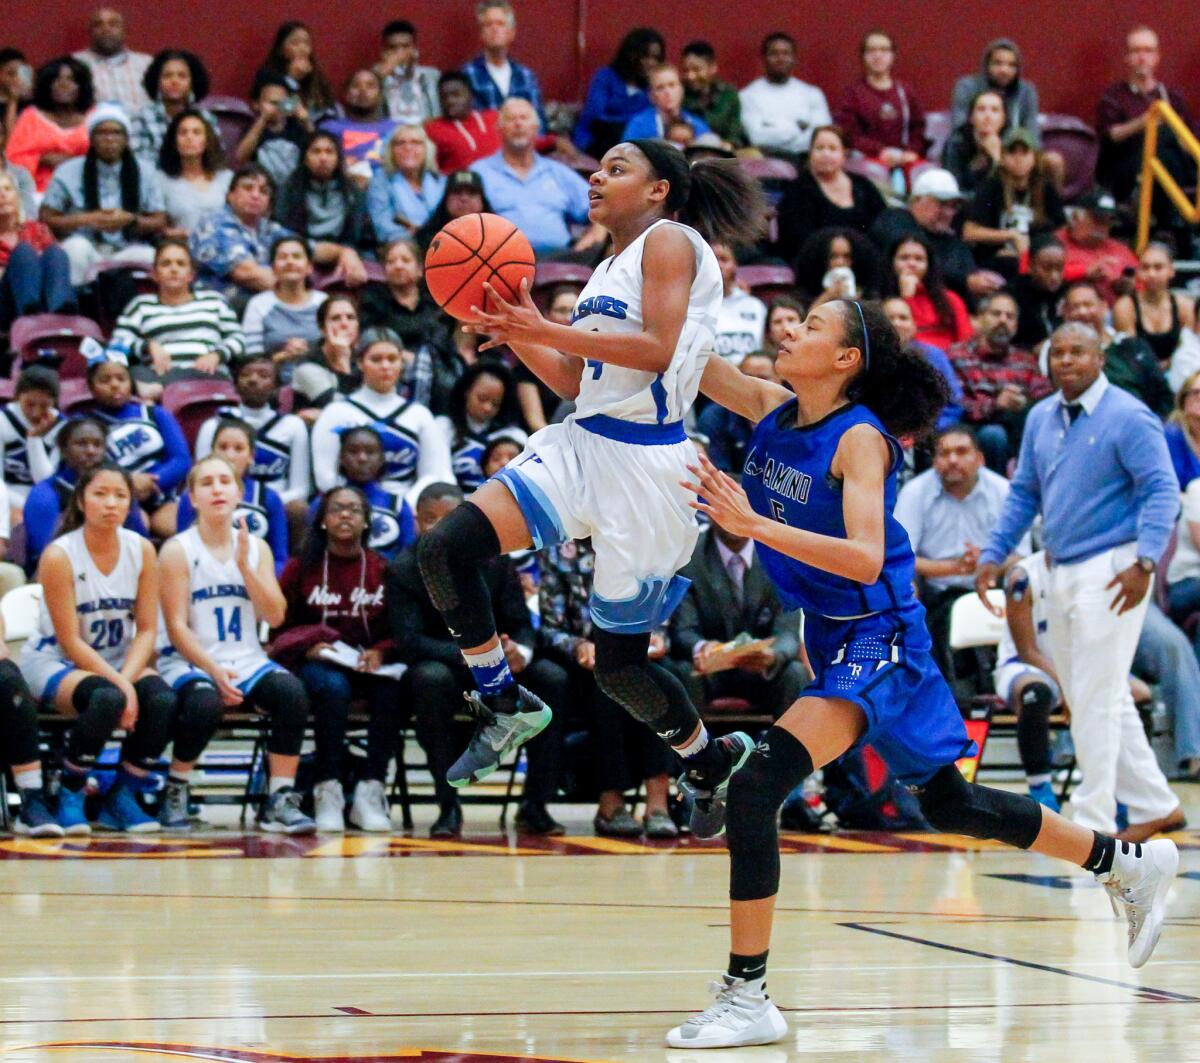 Palisades' Kayla Williams (left) gets airborne for a layup against El Camino Real during the City Section Open Division girls basketball final on March 5.